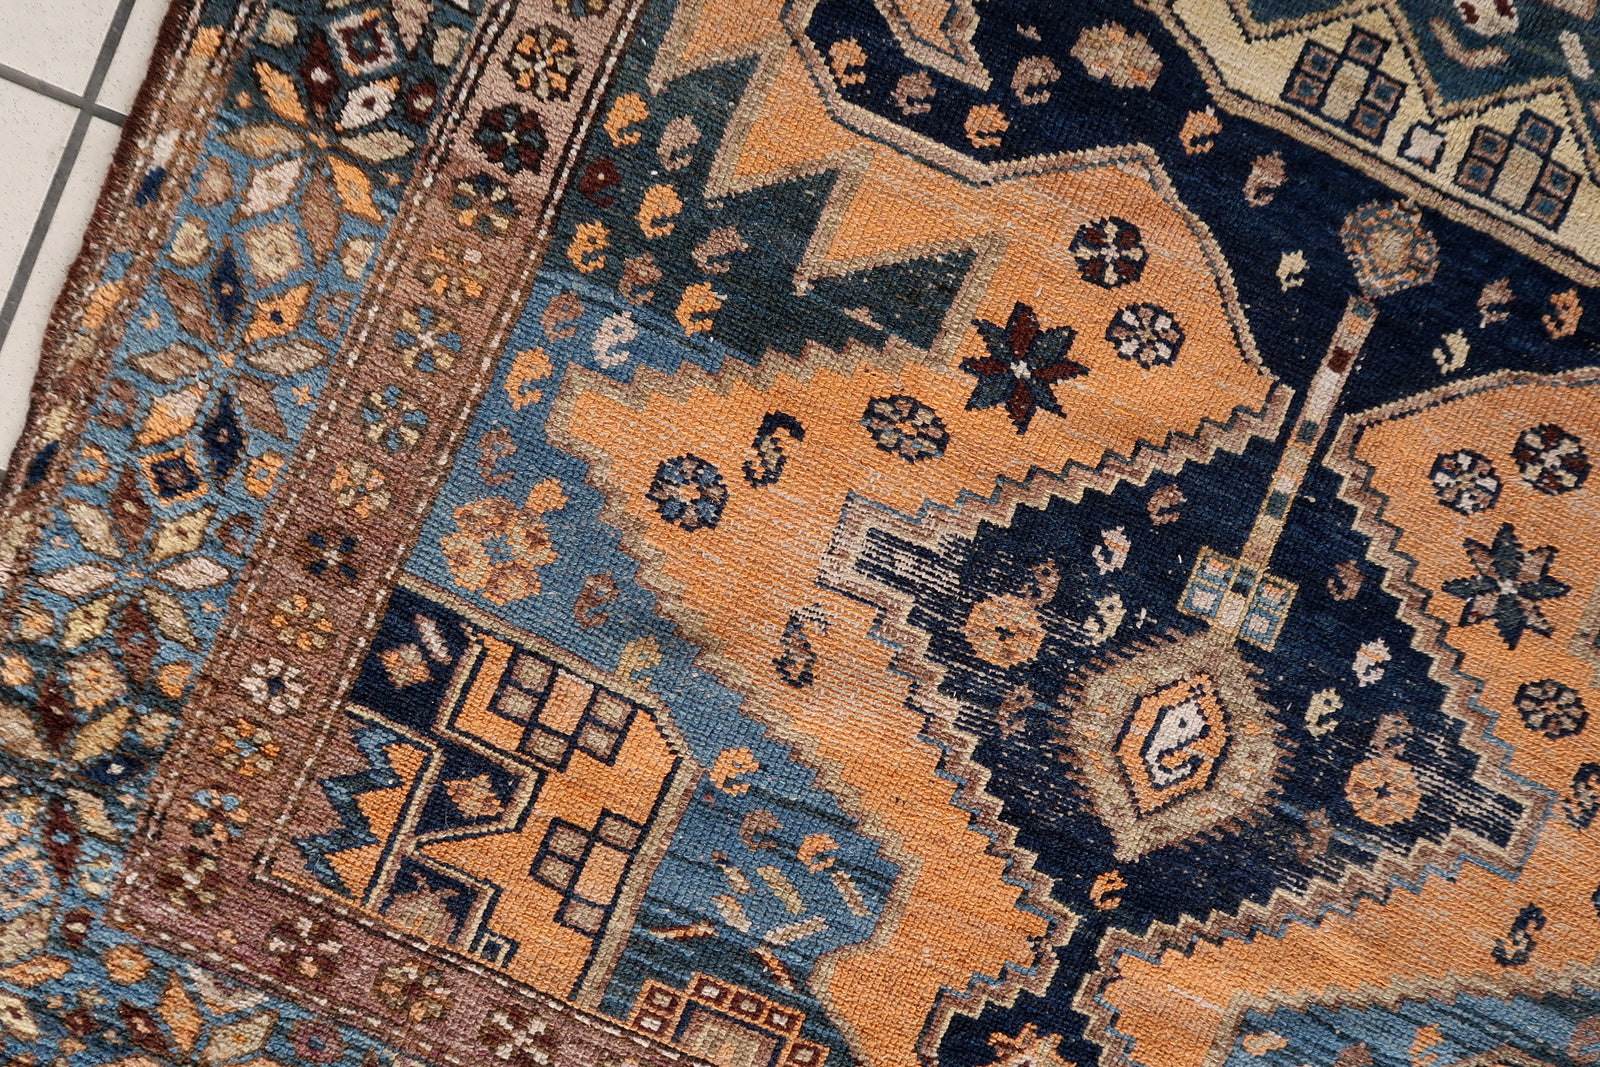 Close-up of distressed appearance on Handmade Antique Caucasian Shirvan Rug - Detailed view emphasizing the distressed appearance that adds character to the rug.